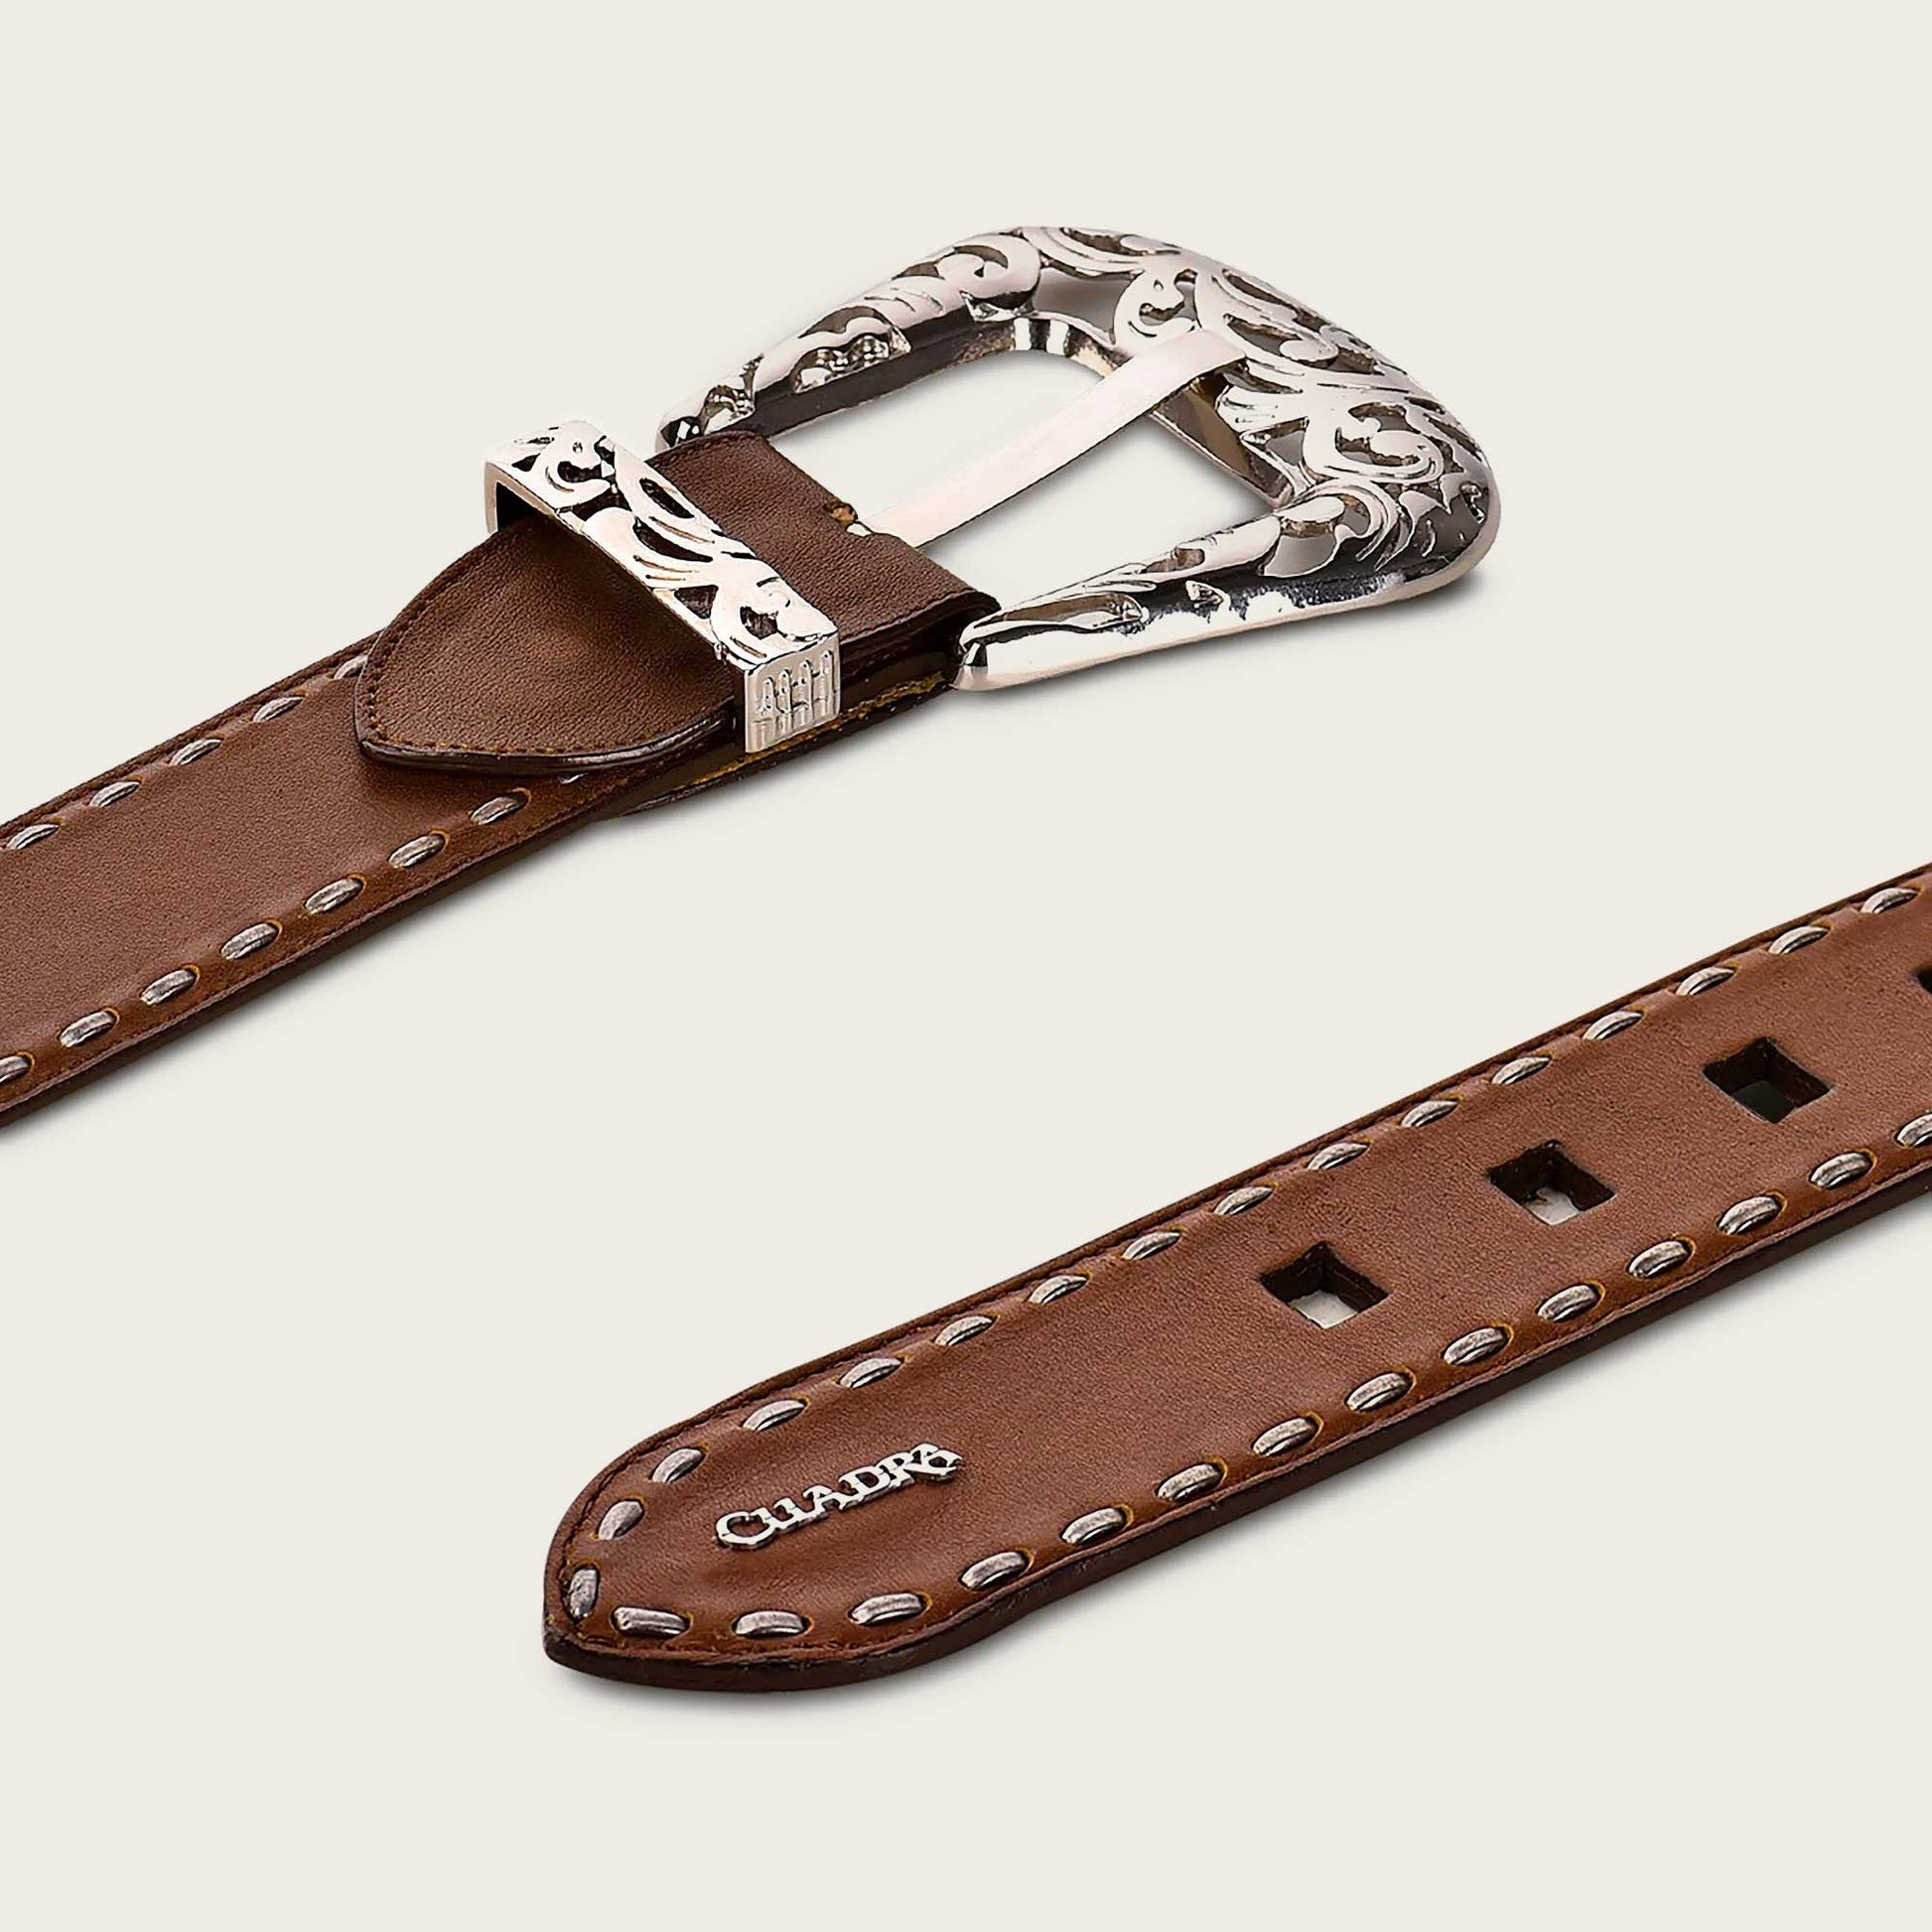 45mm metallic buckle and tip with Cuadra logo